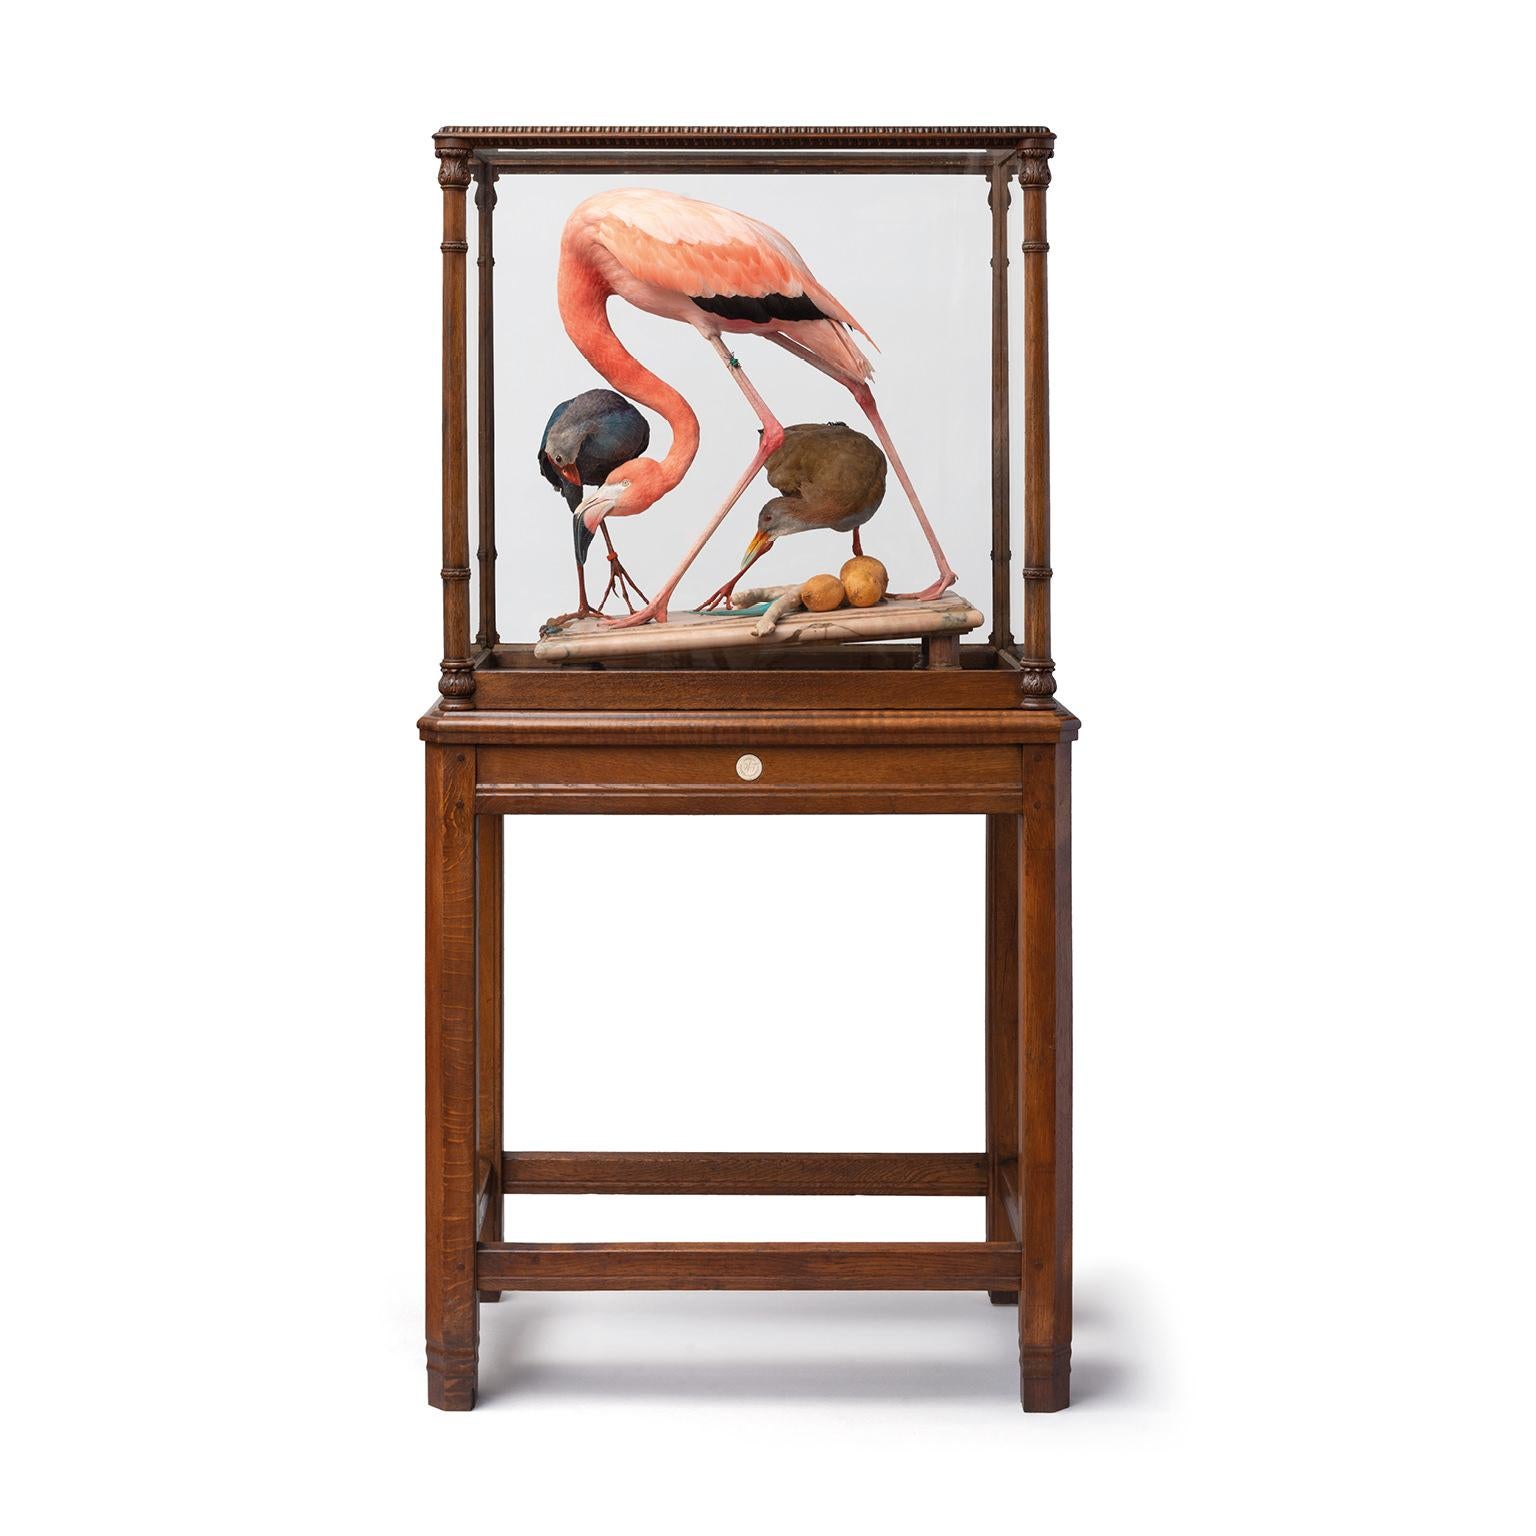 The Haarlem taxidermists Jaap Sinke and Ferry van Tongeren have recreated Audubon’s iconic flamingo especially for the ‘Vogelpracht’ exhibition at Teylers Museum. As an artist, John James Audubon is one of the sources of inspiration for their own